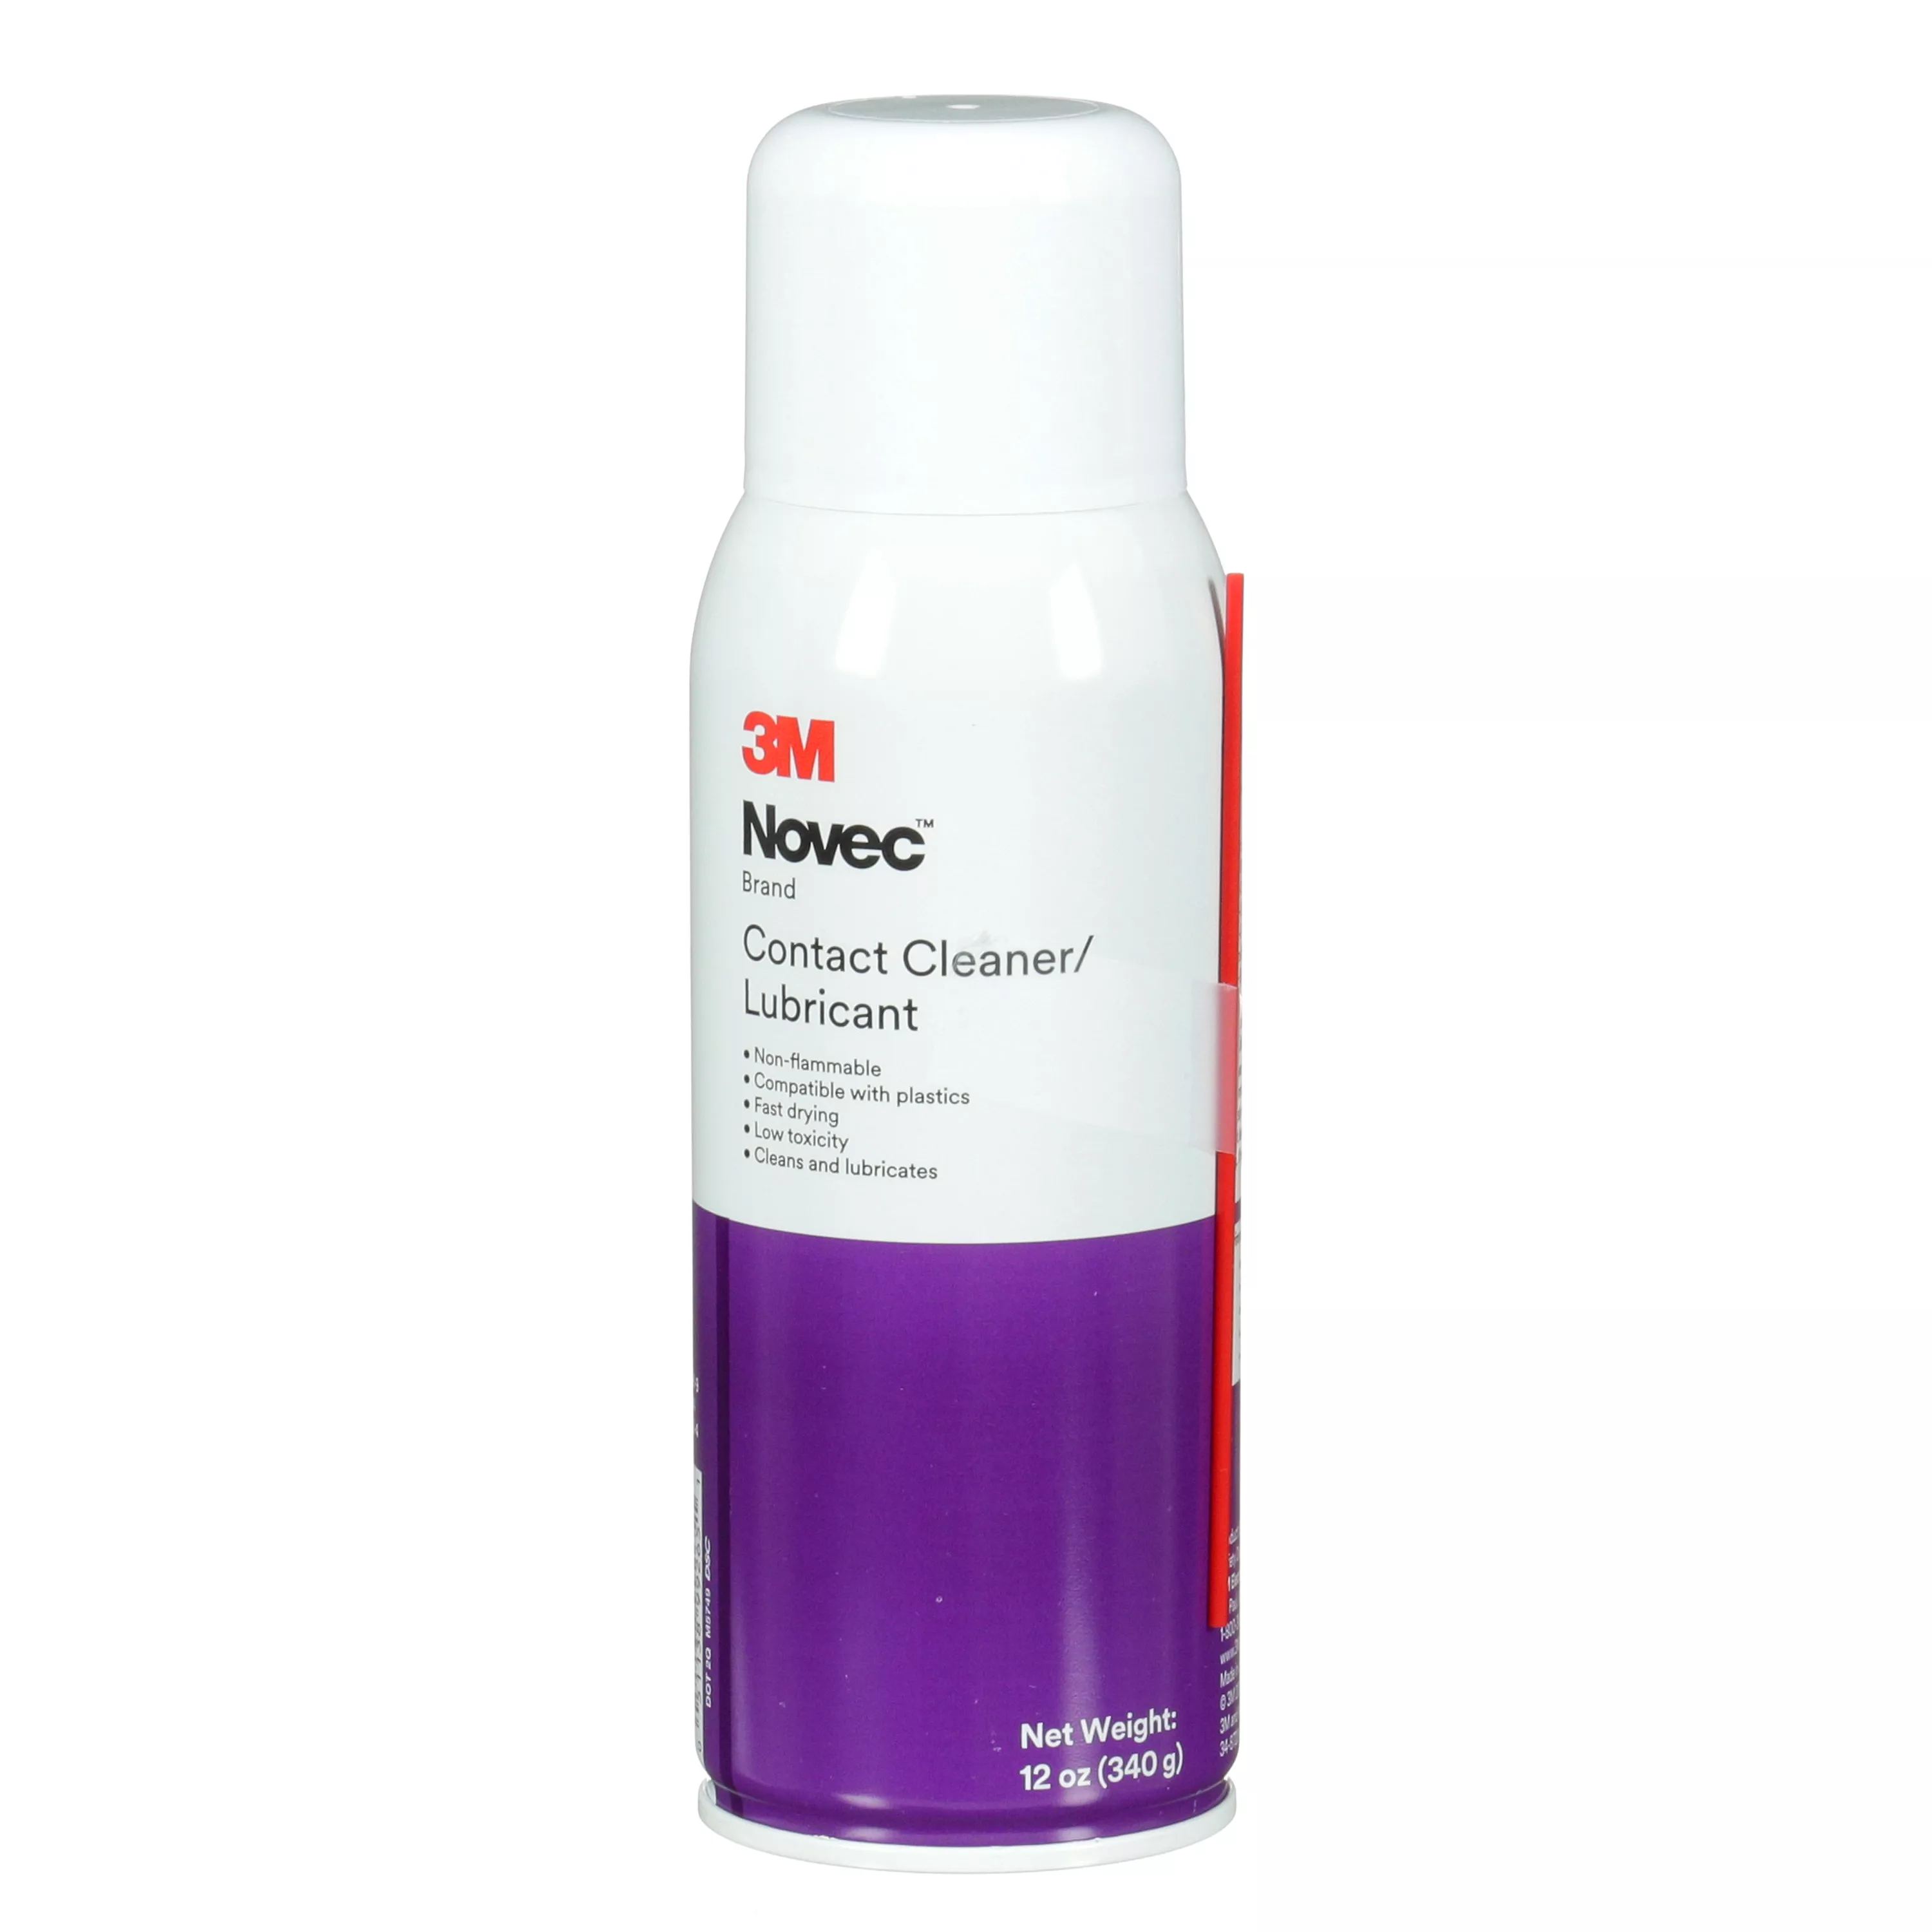 3M™ Novec™ Contact Cleaner/Lubricant, 340 g (12 oz), 1 Canister/Case